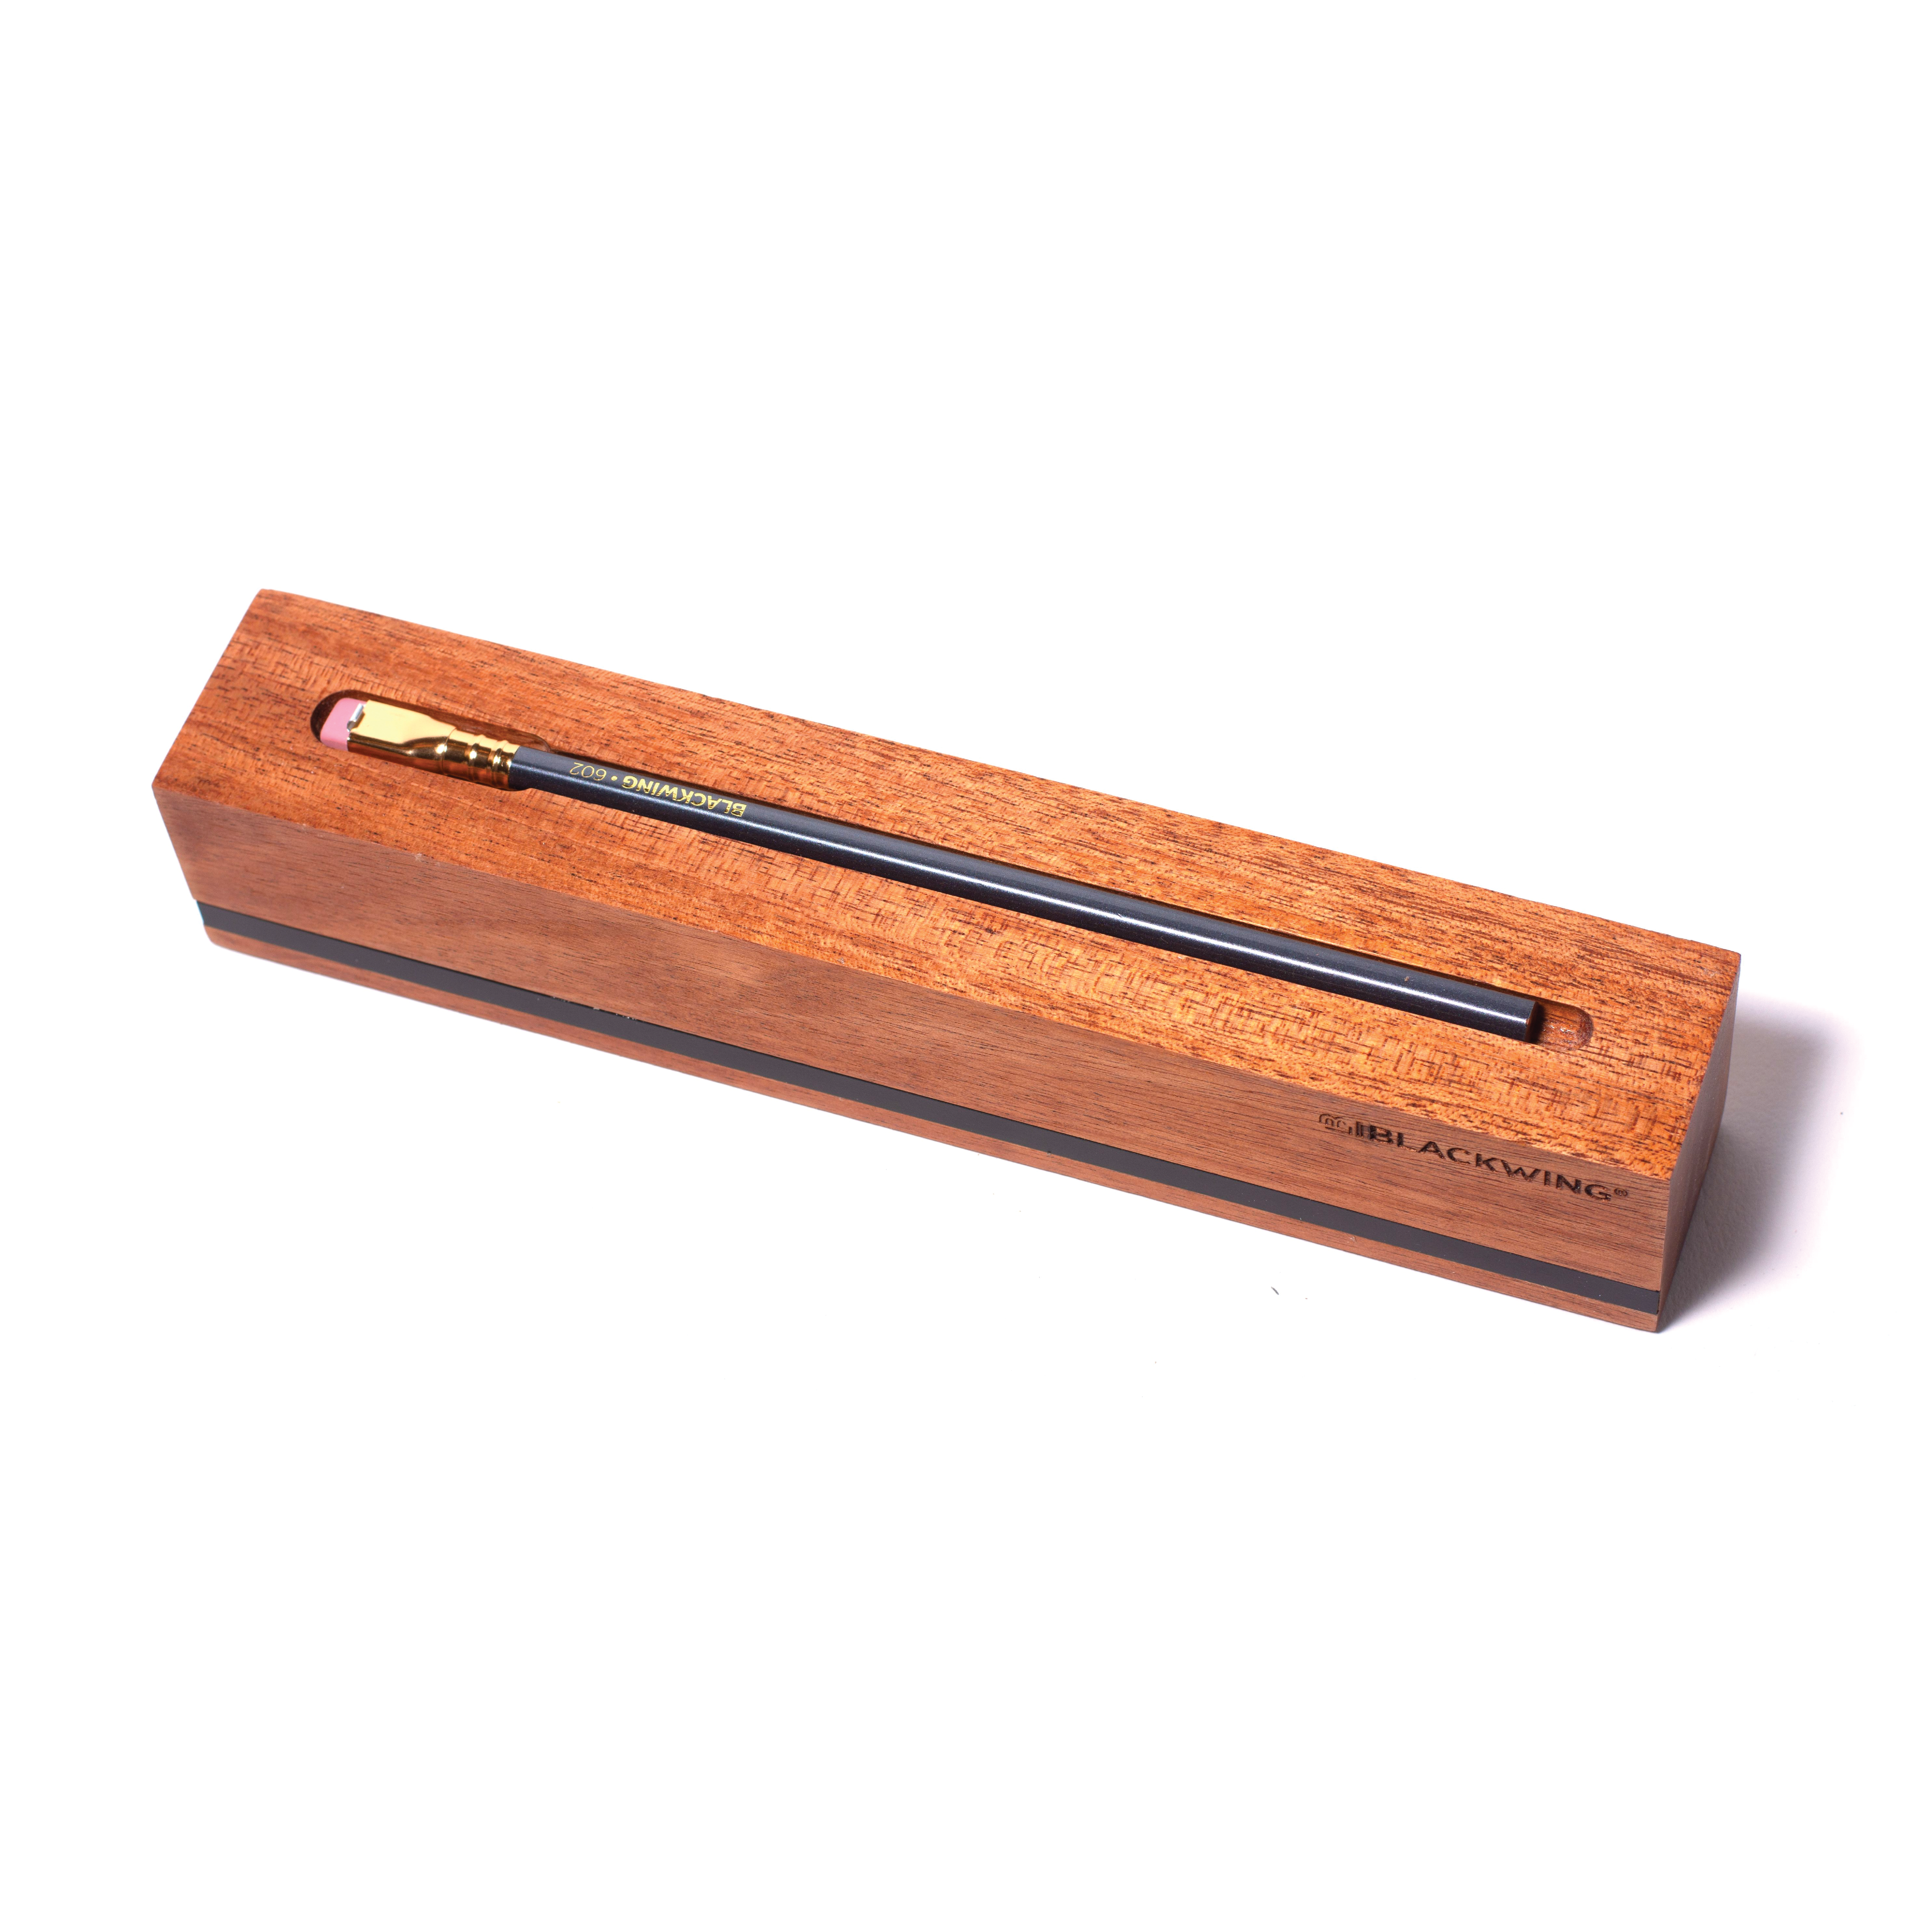 A Blackwing Flat Single Pencil Display in a wooden box on top of a white surface.